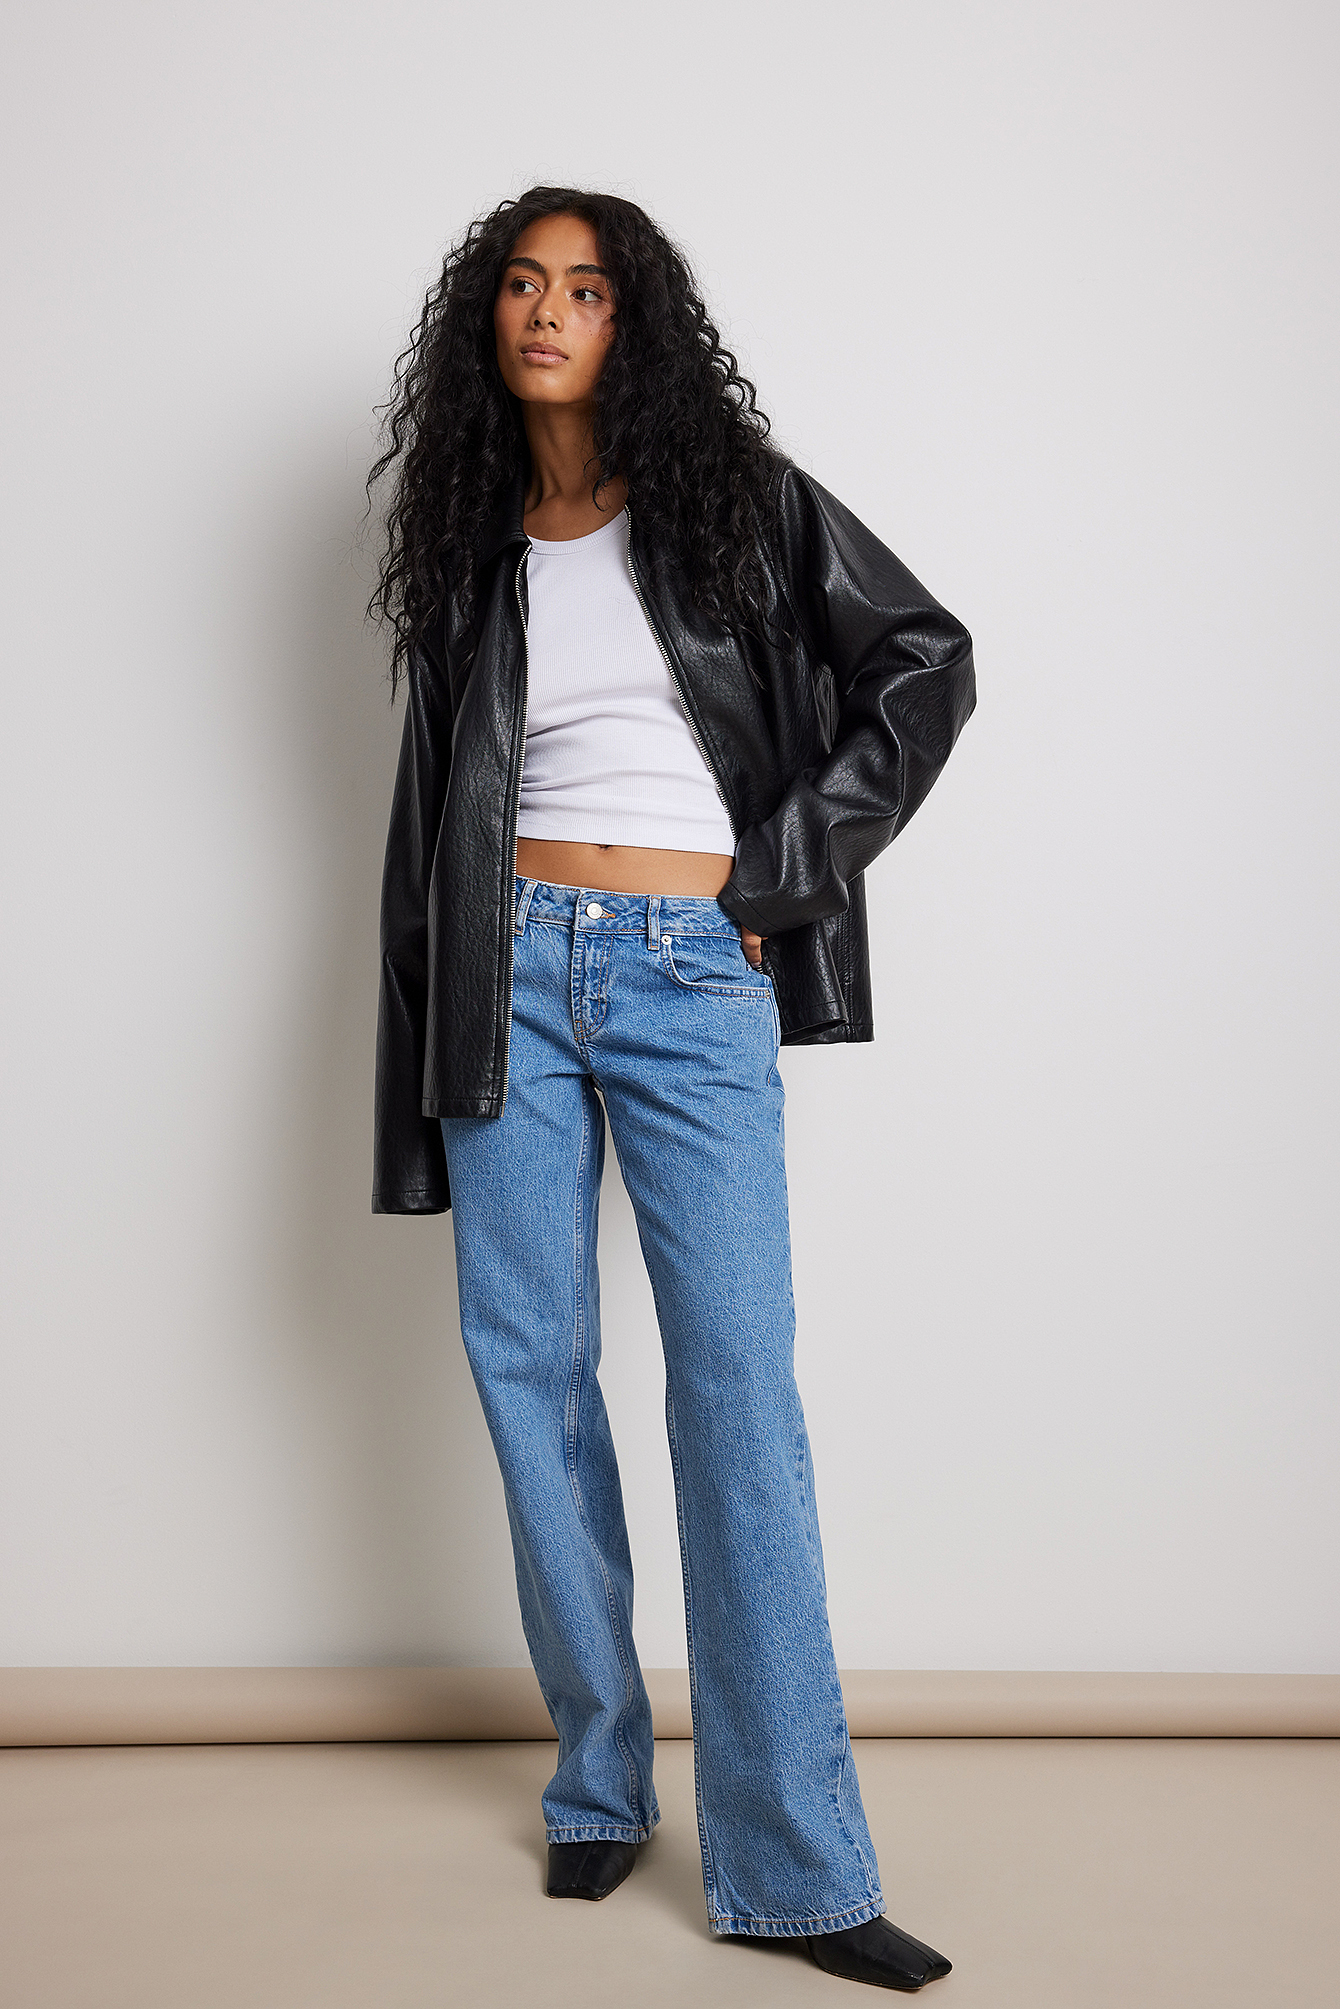 Low Waist Straight Denim Outfit